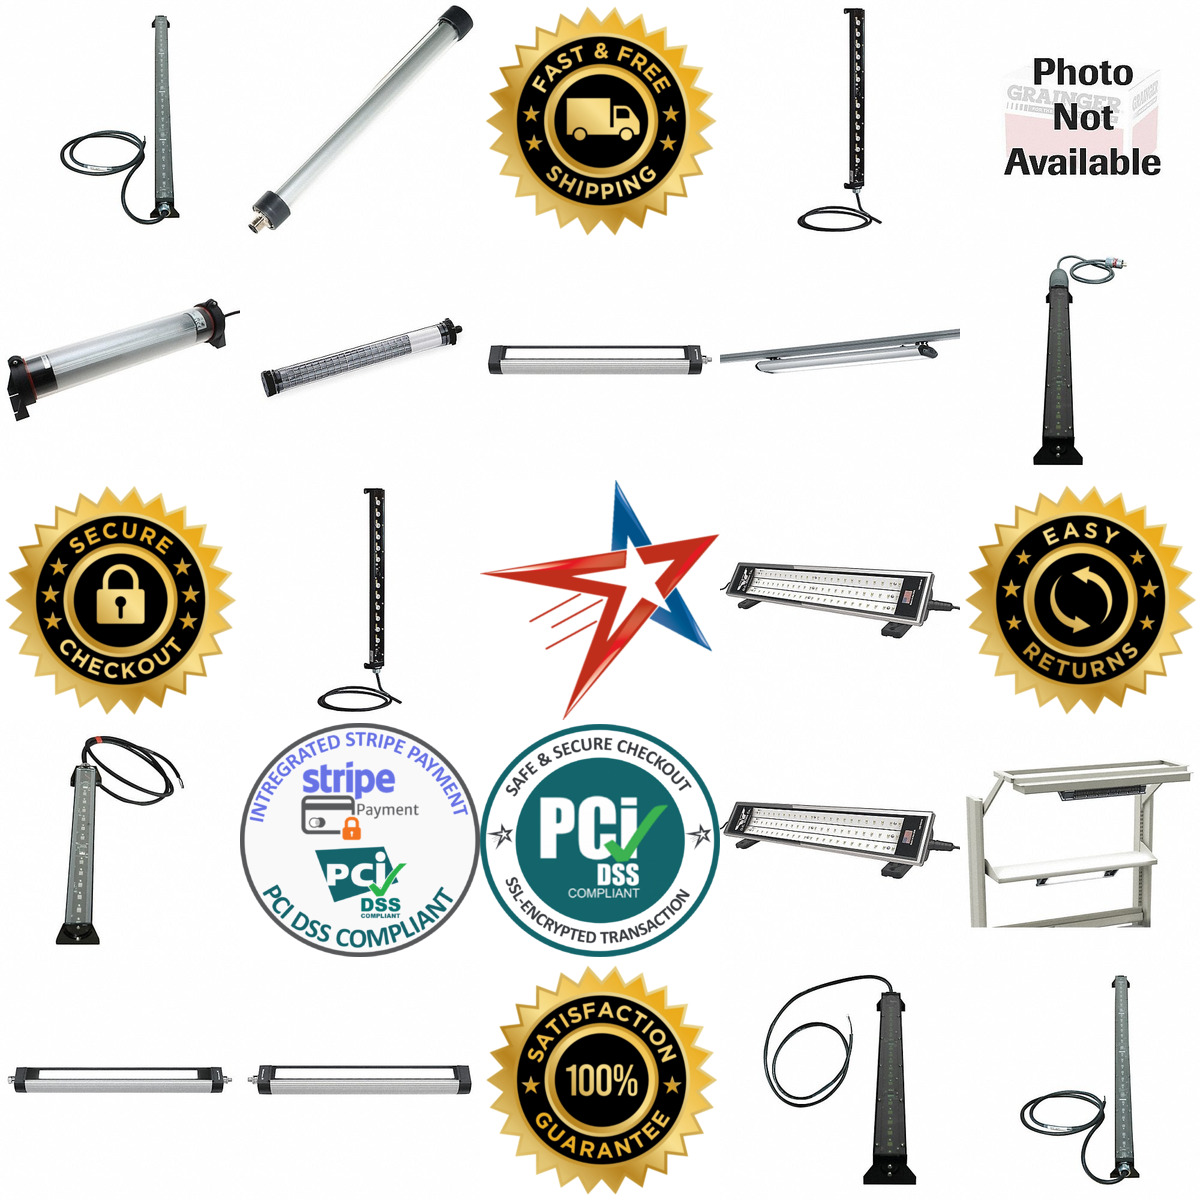 A selection of Linear Machine Tool and Task Lights products on GoVets